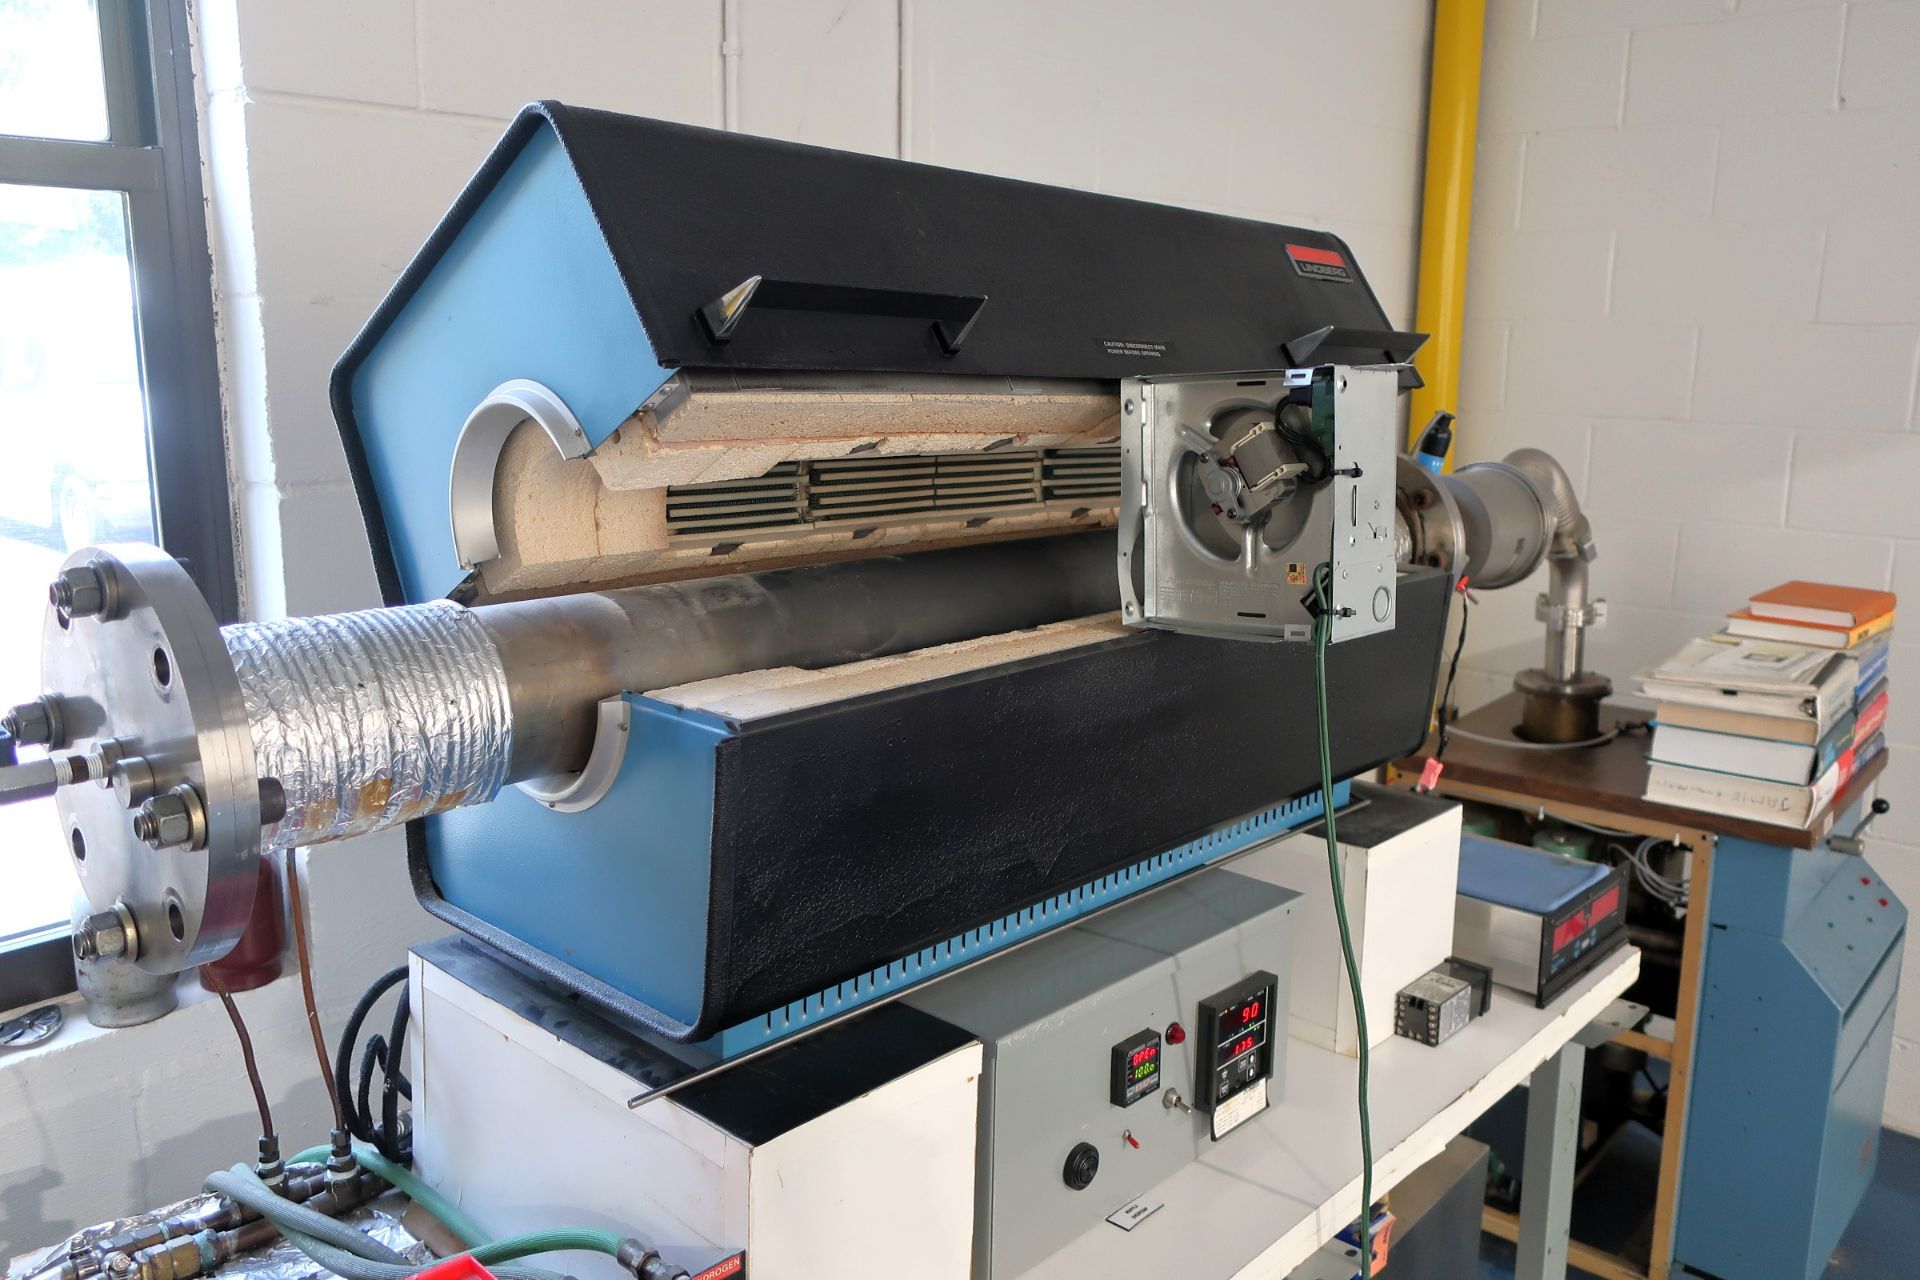 Vacuum Oven Measuring Instrumentation Machine built by Evey Engineering - Image 6 of 10